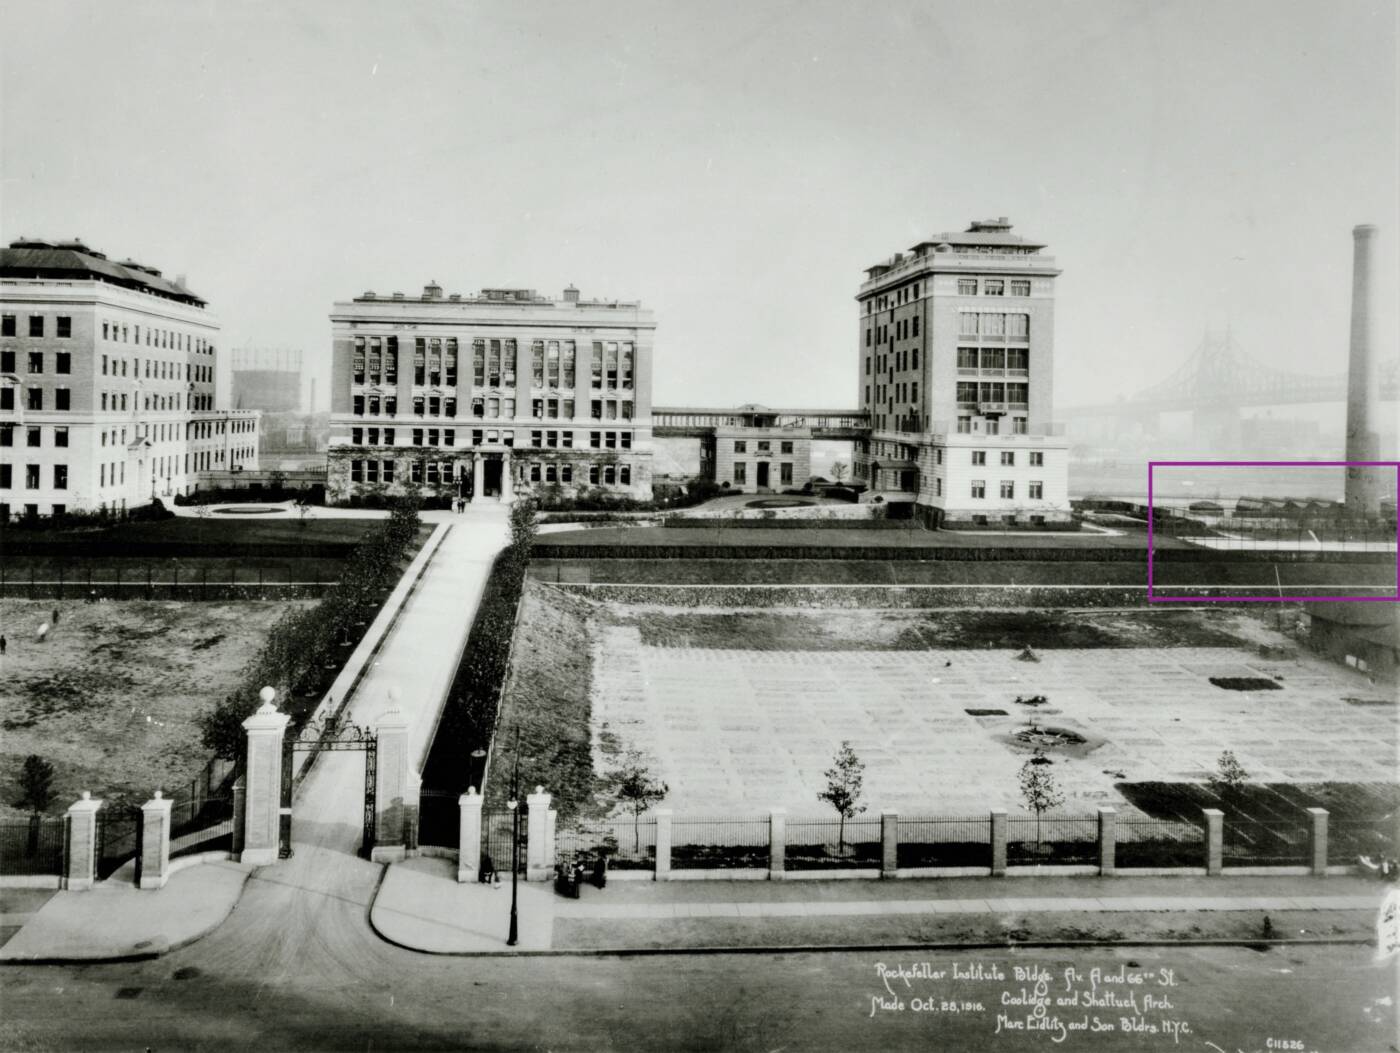 1916 photo of Rockfeller Institute with tennis court highlighted